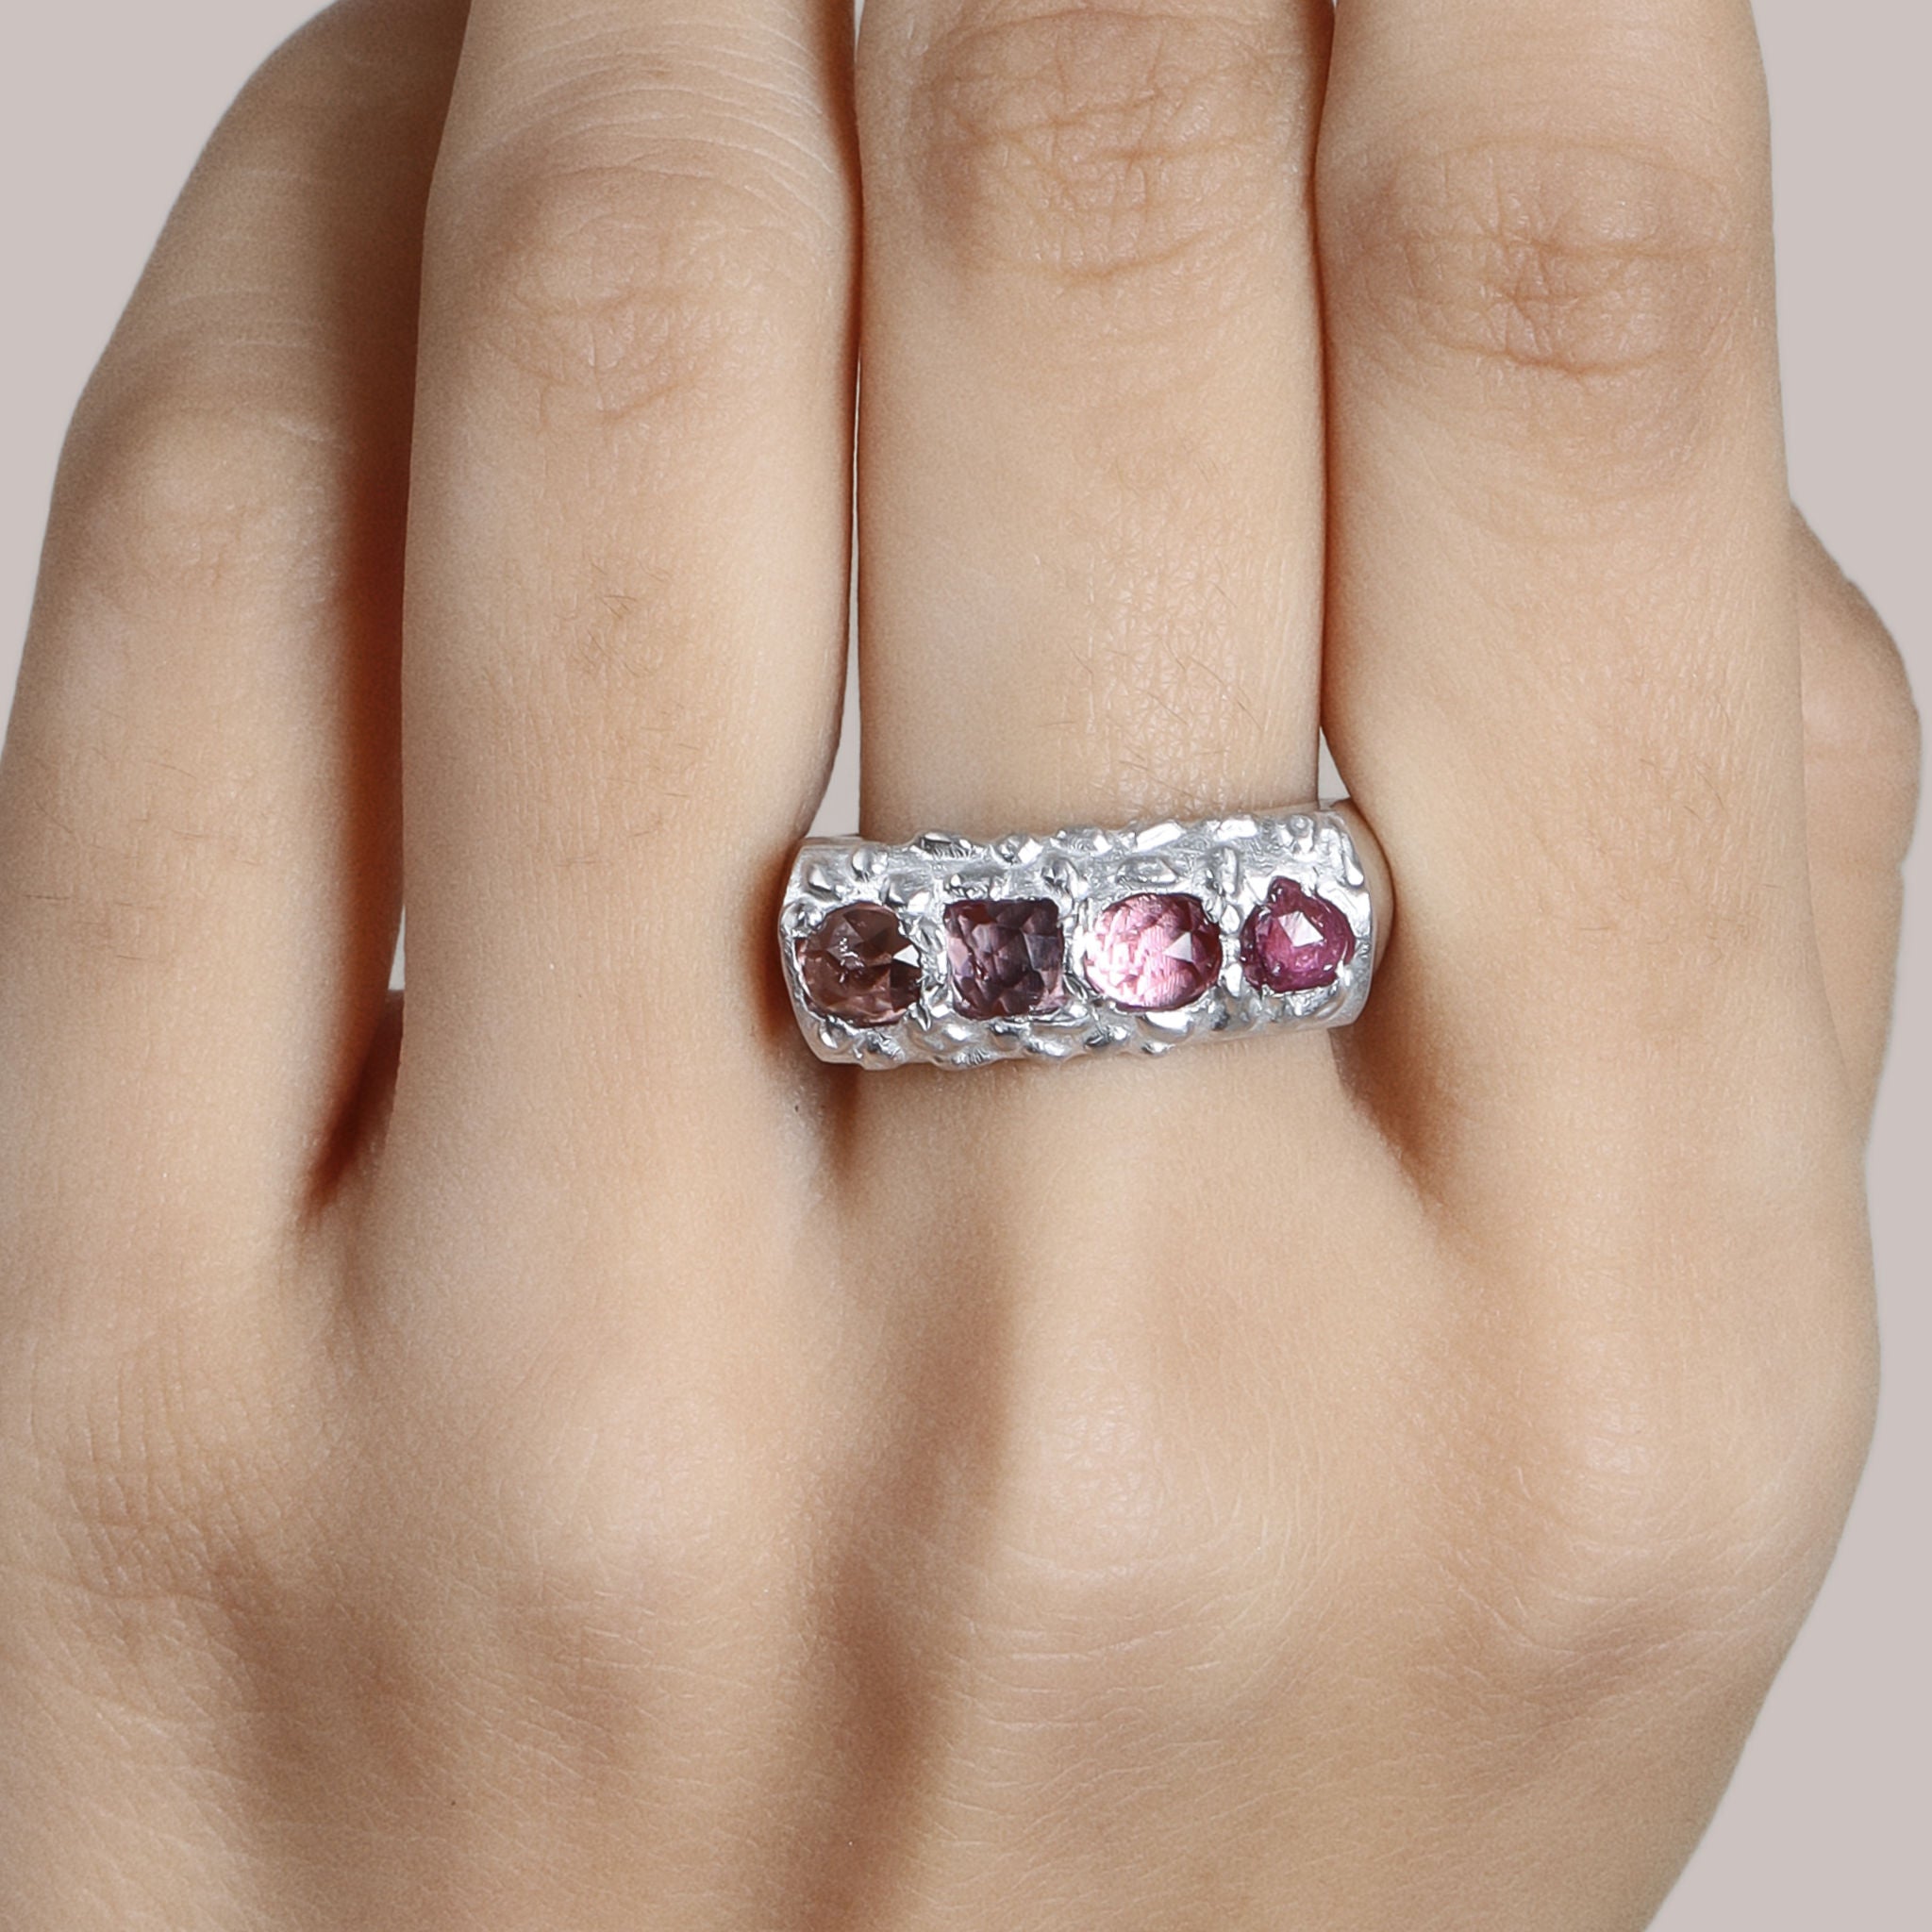 HumanKind Ring. Pink Tourmaline Ombre. 925 Silver